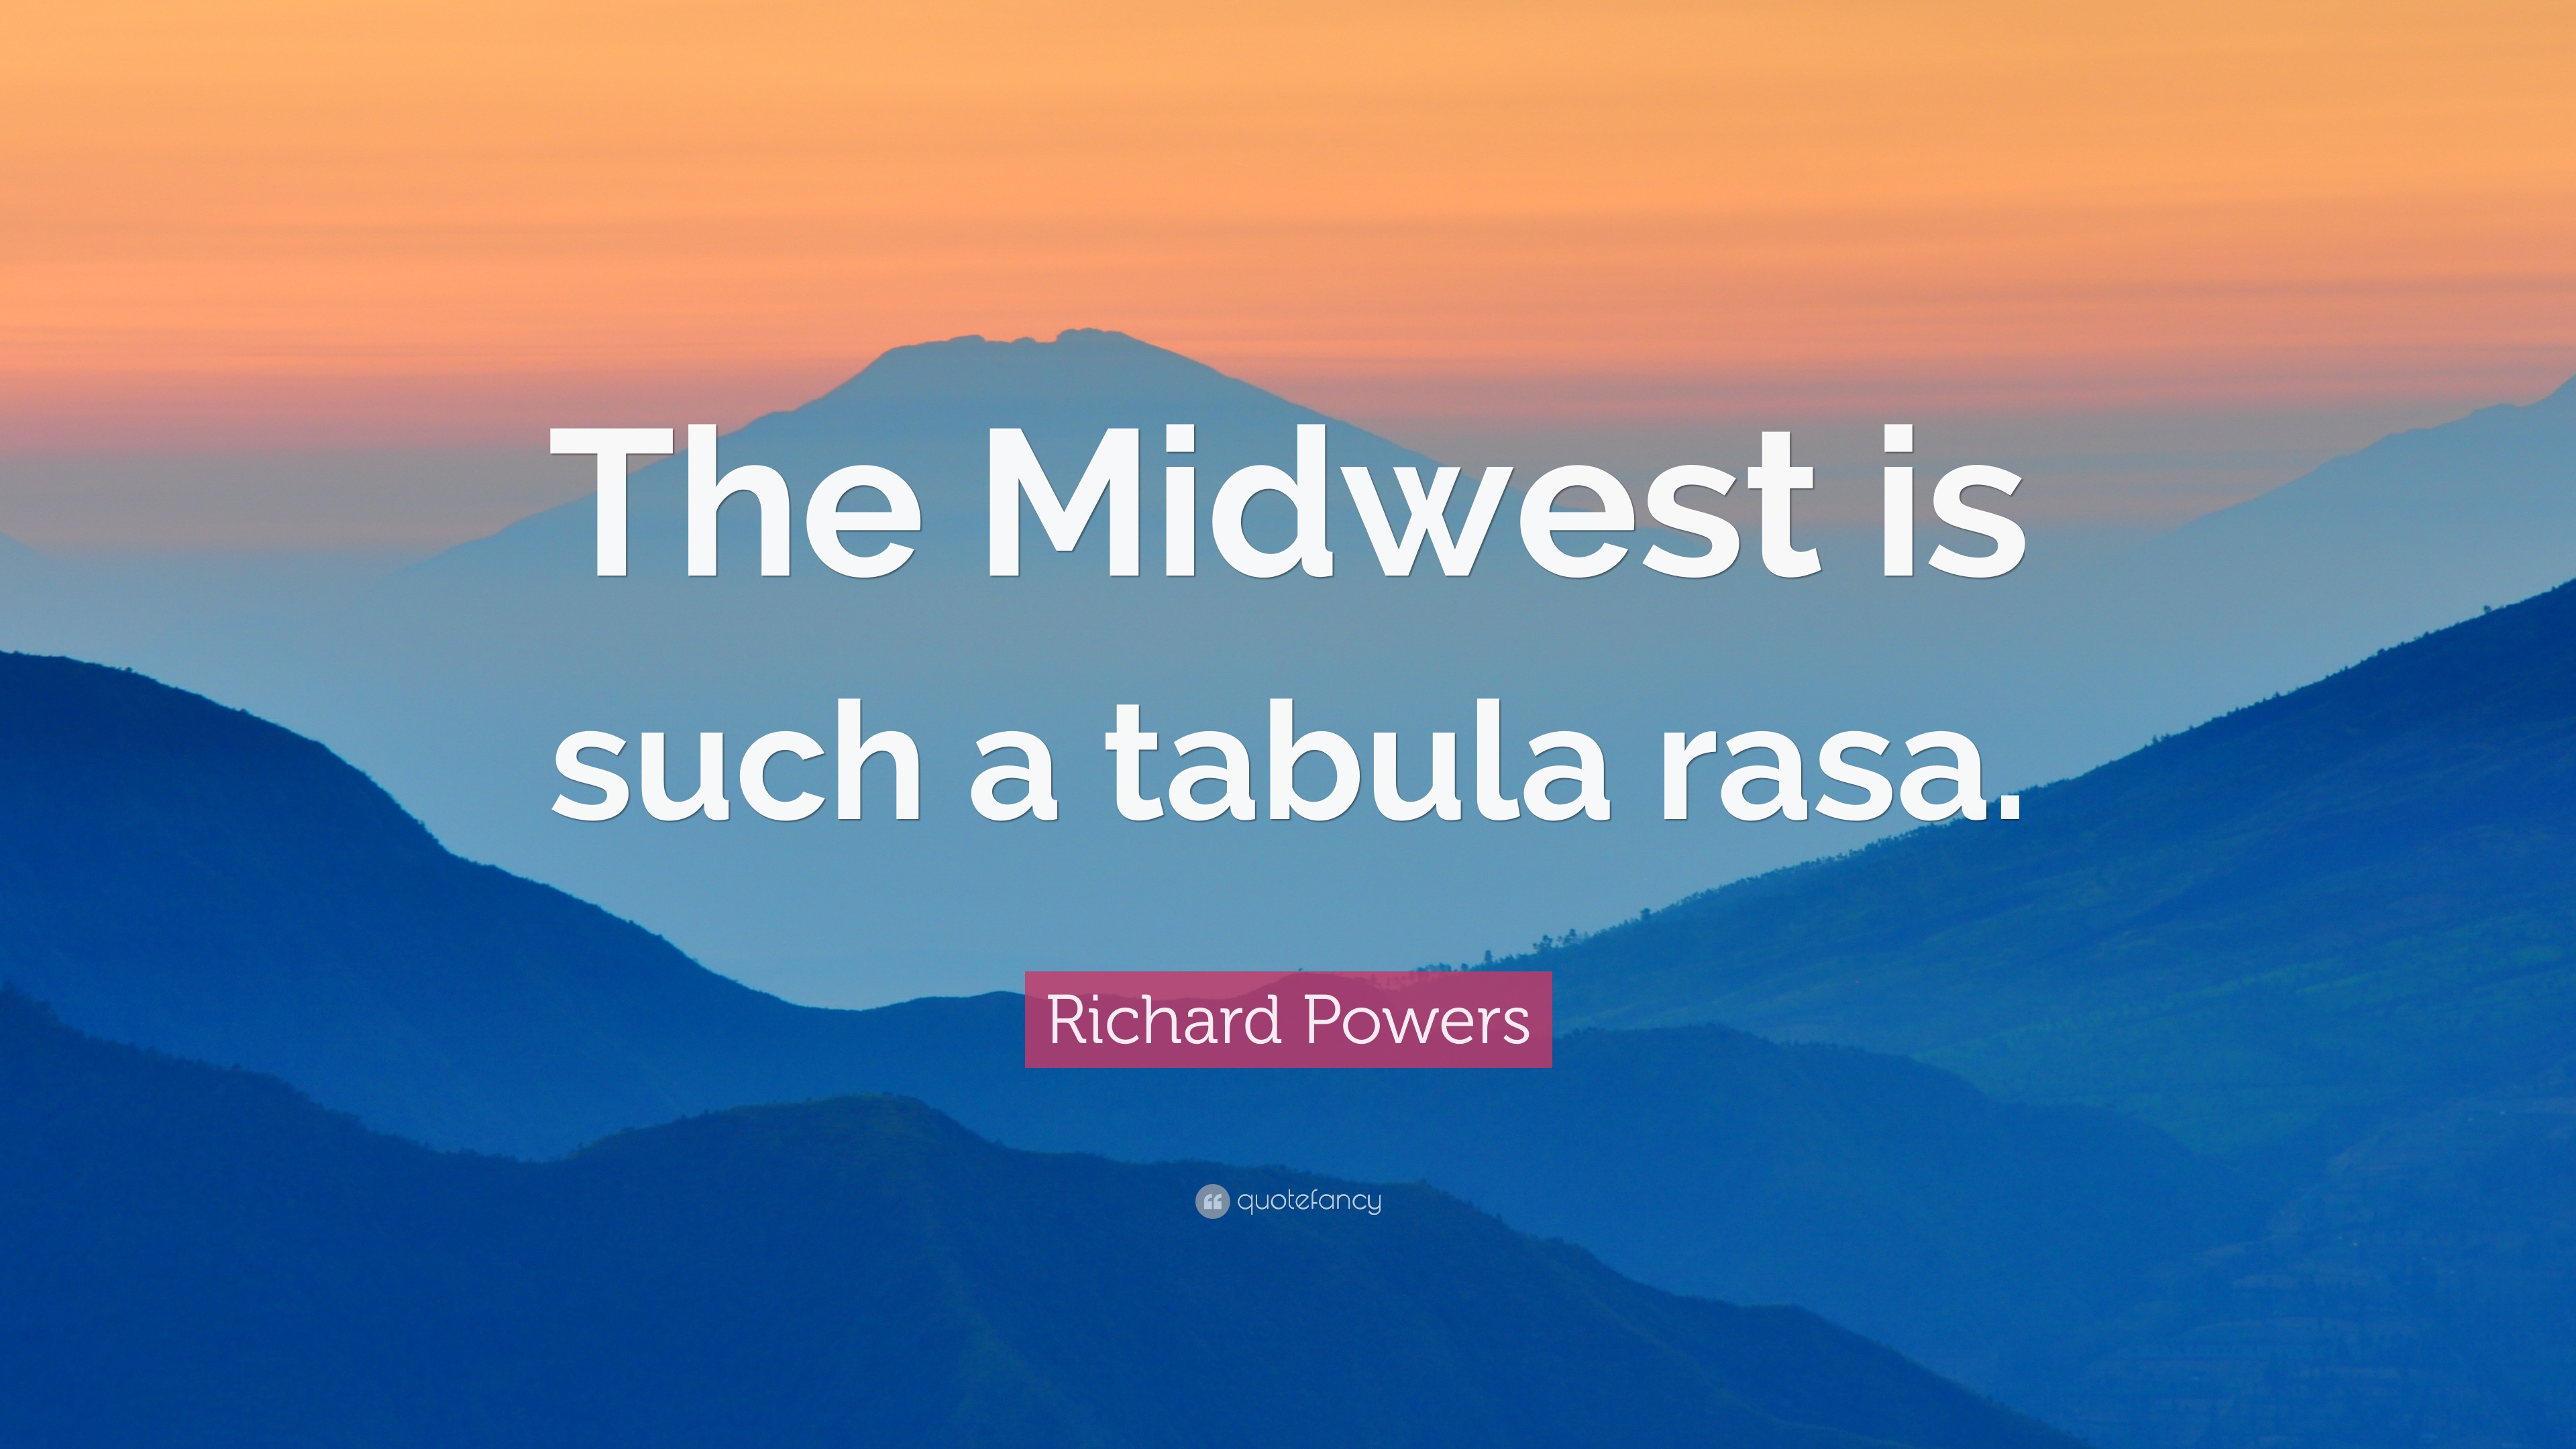 Richard Powers Quote: “The Midwest is such a tabula rasa.” 7